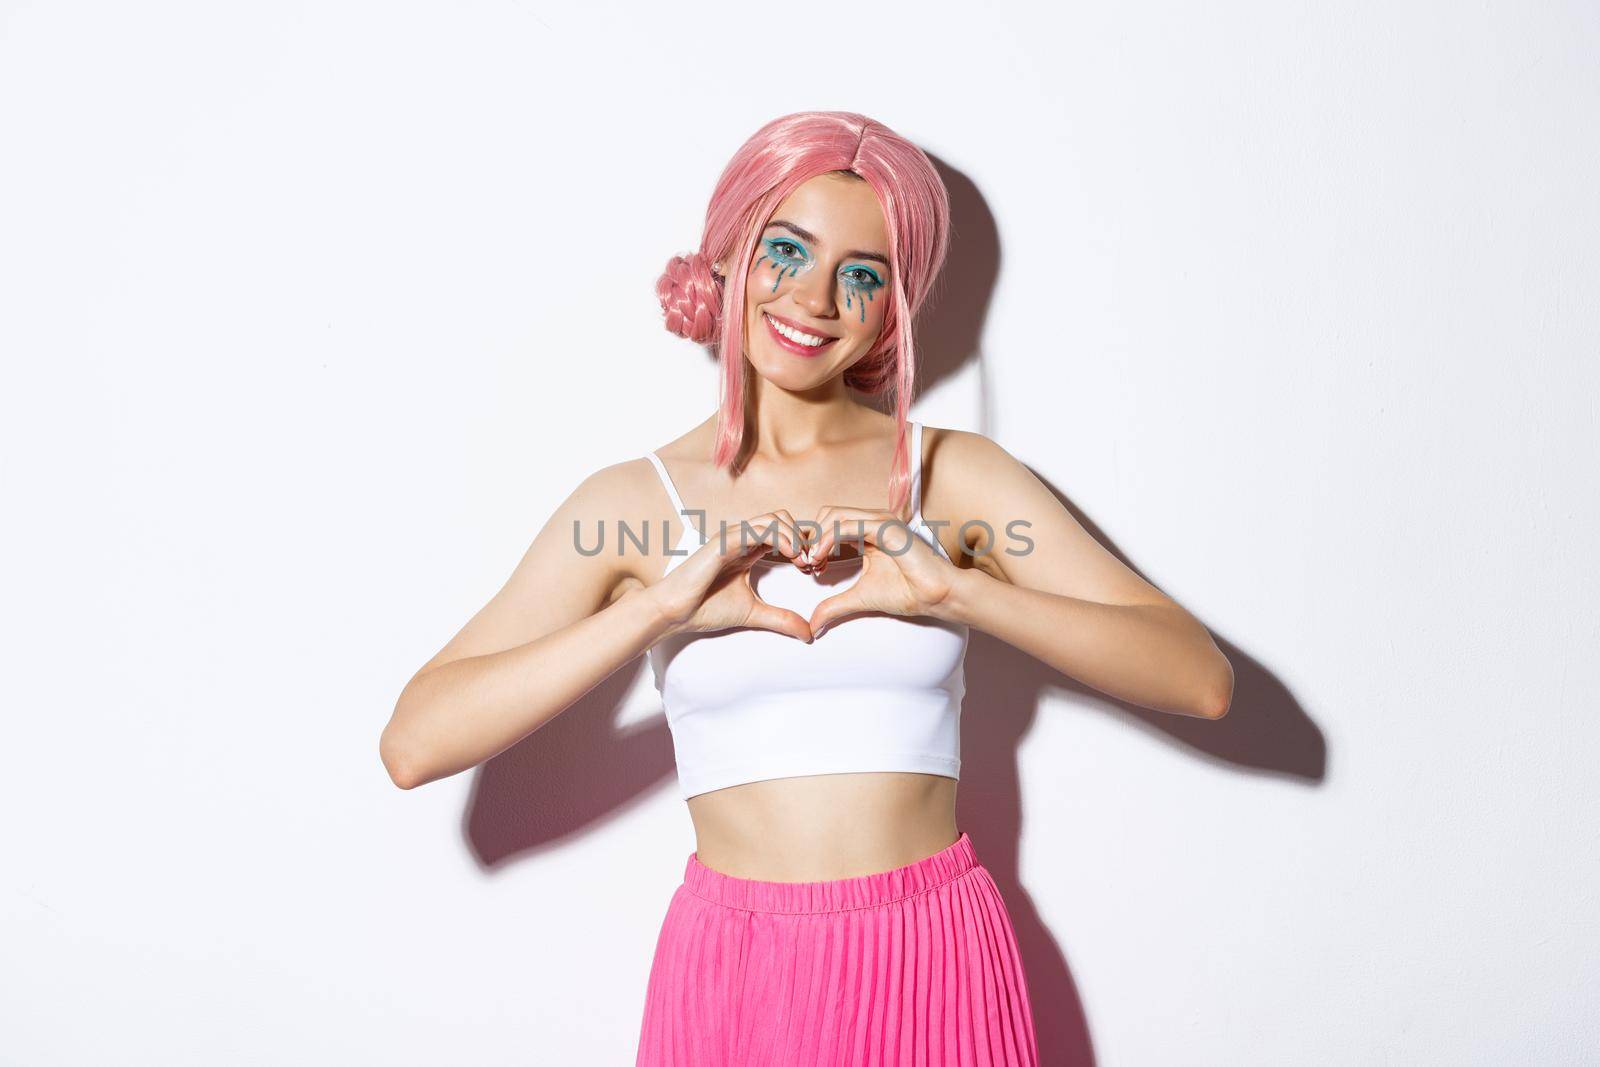 Portrait of lovely girl in pink party wig and bright makeup, showing heart gesture and smiling, standing over white background.